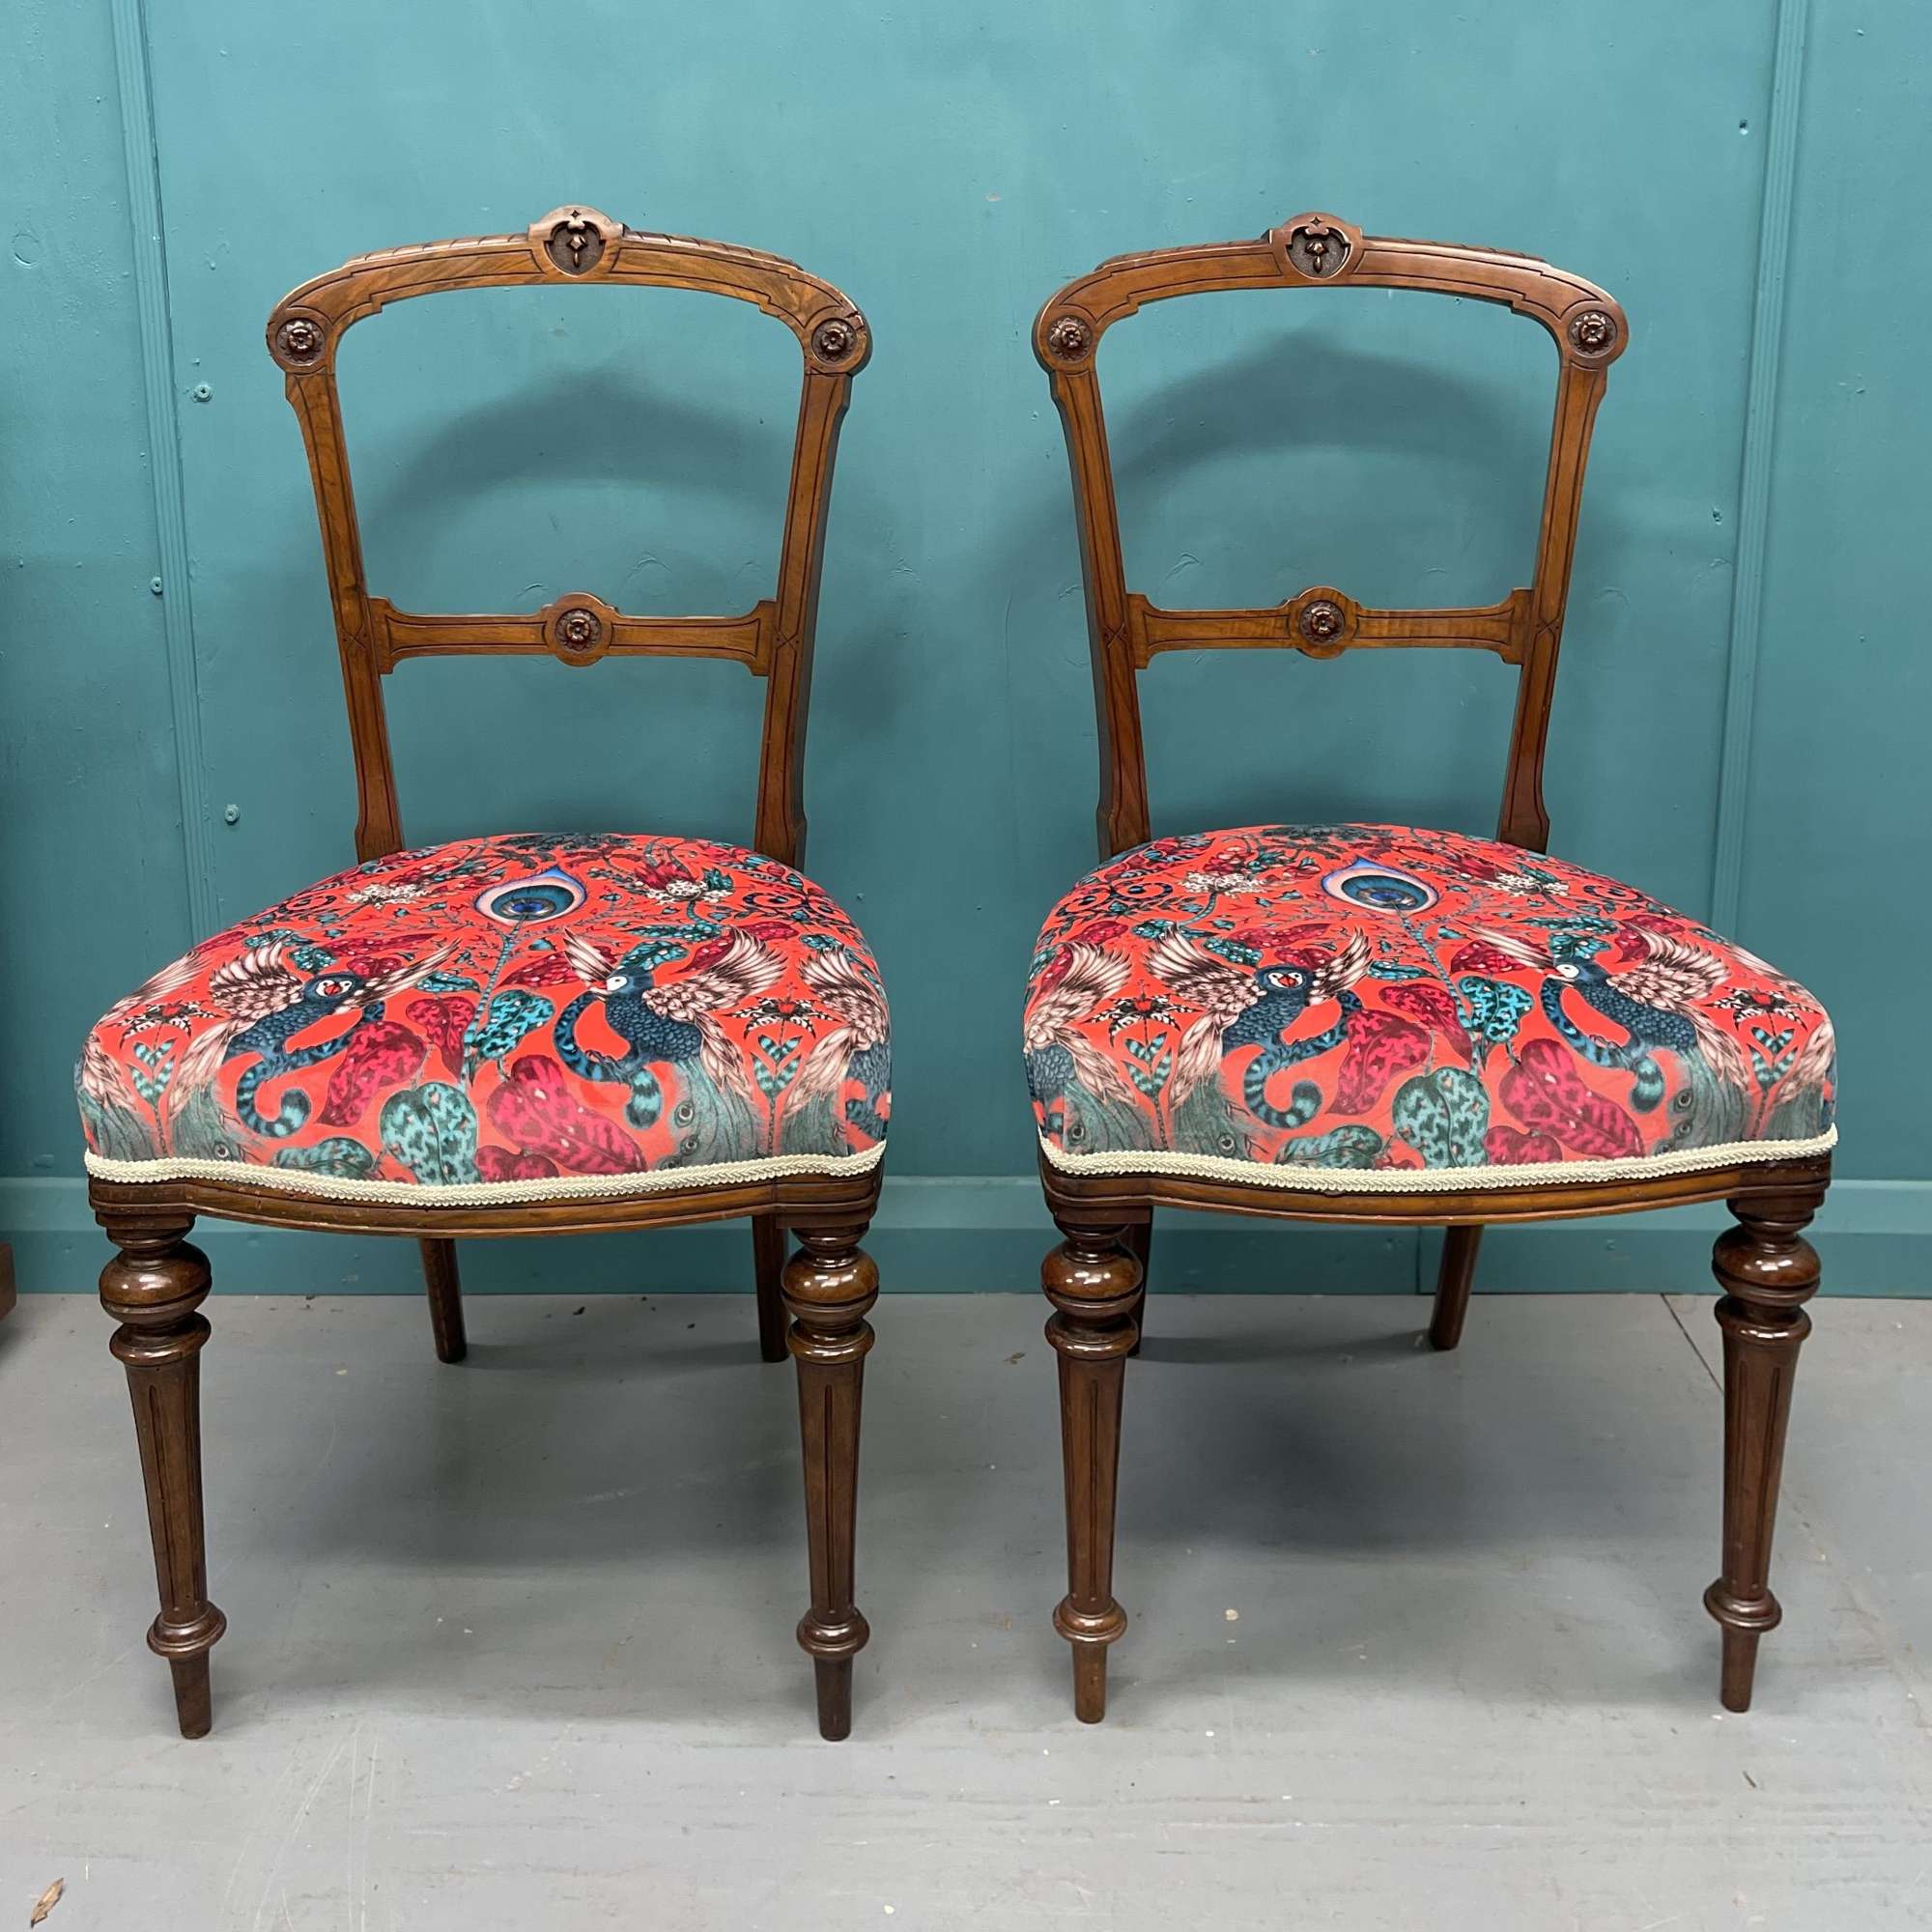 Pair of newly upholstered Edwardian side chairs